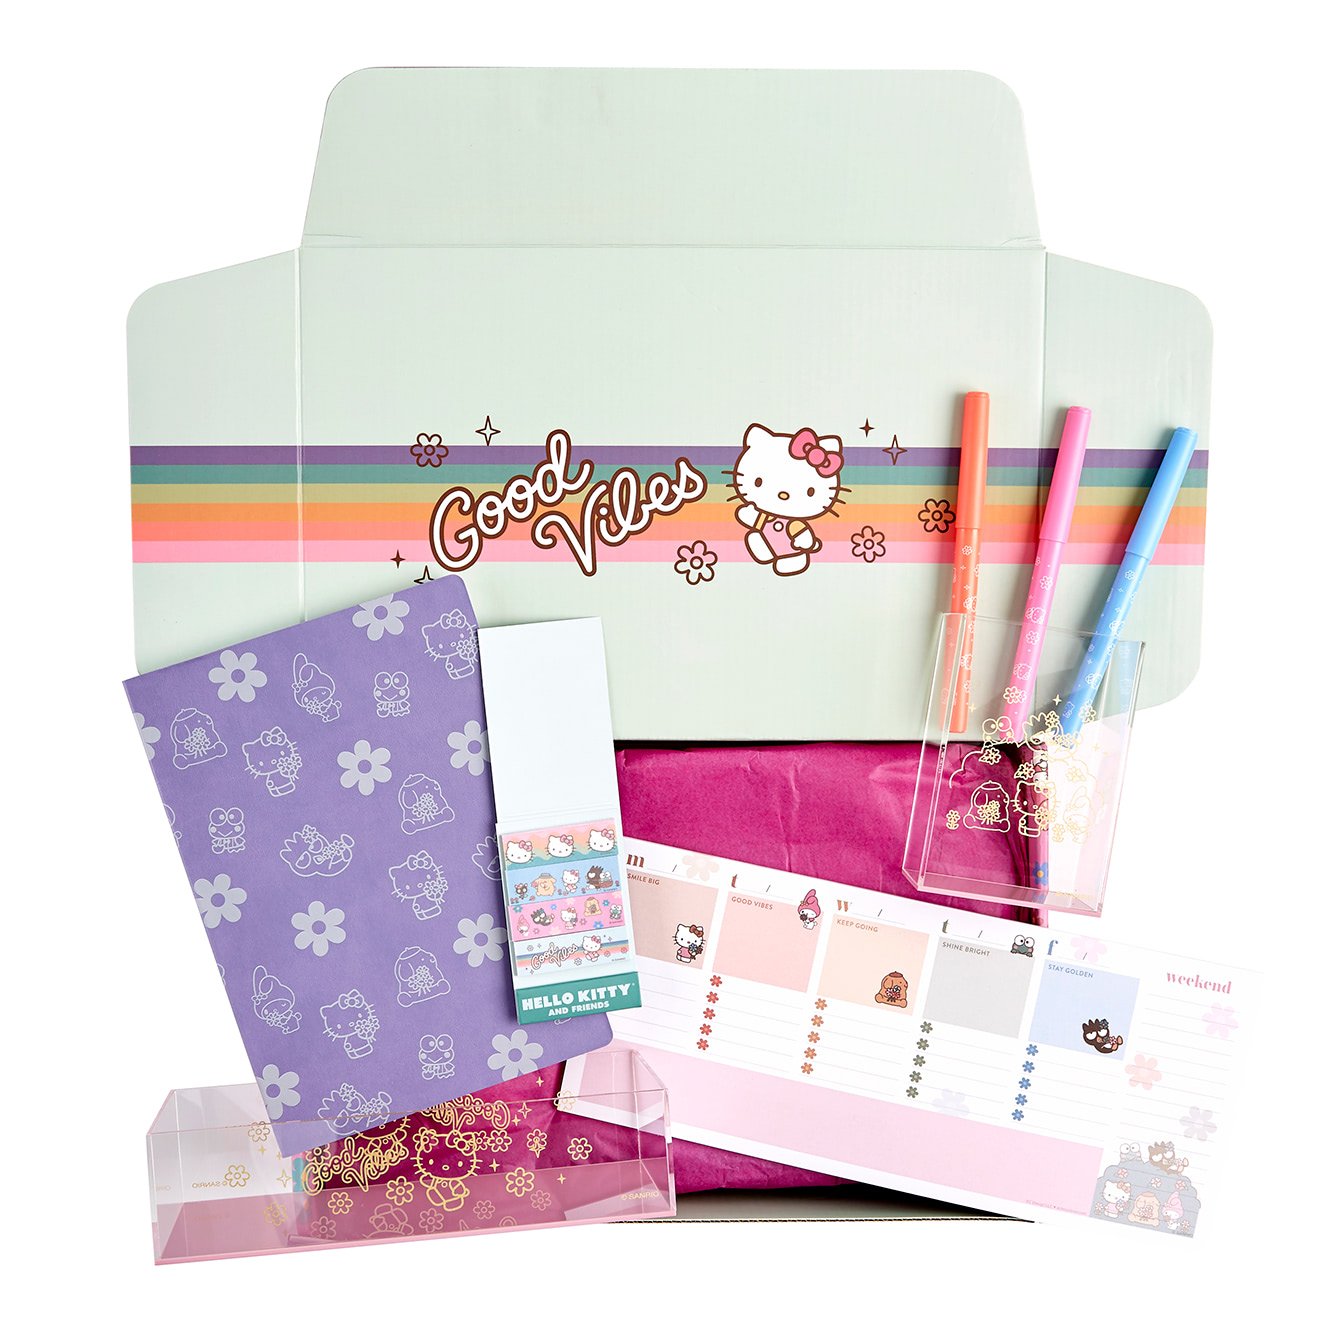 Glow - Hello Kitty and Friends' Prints